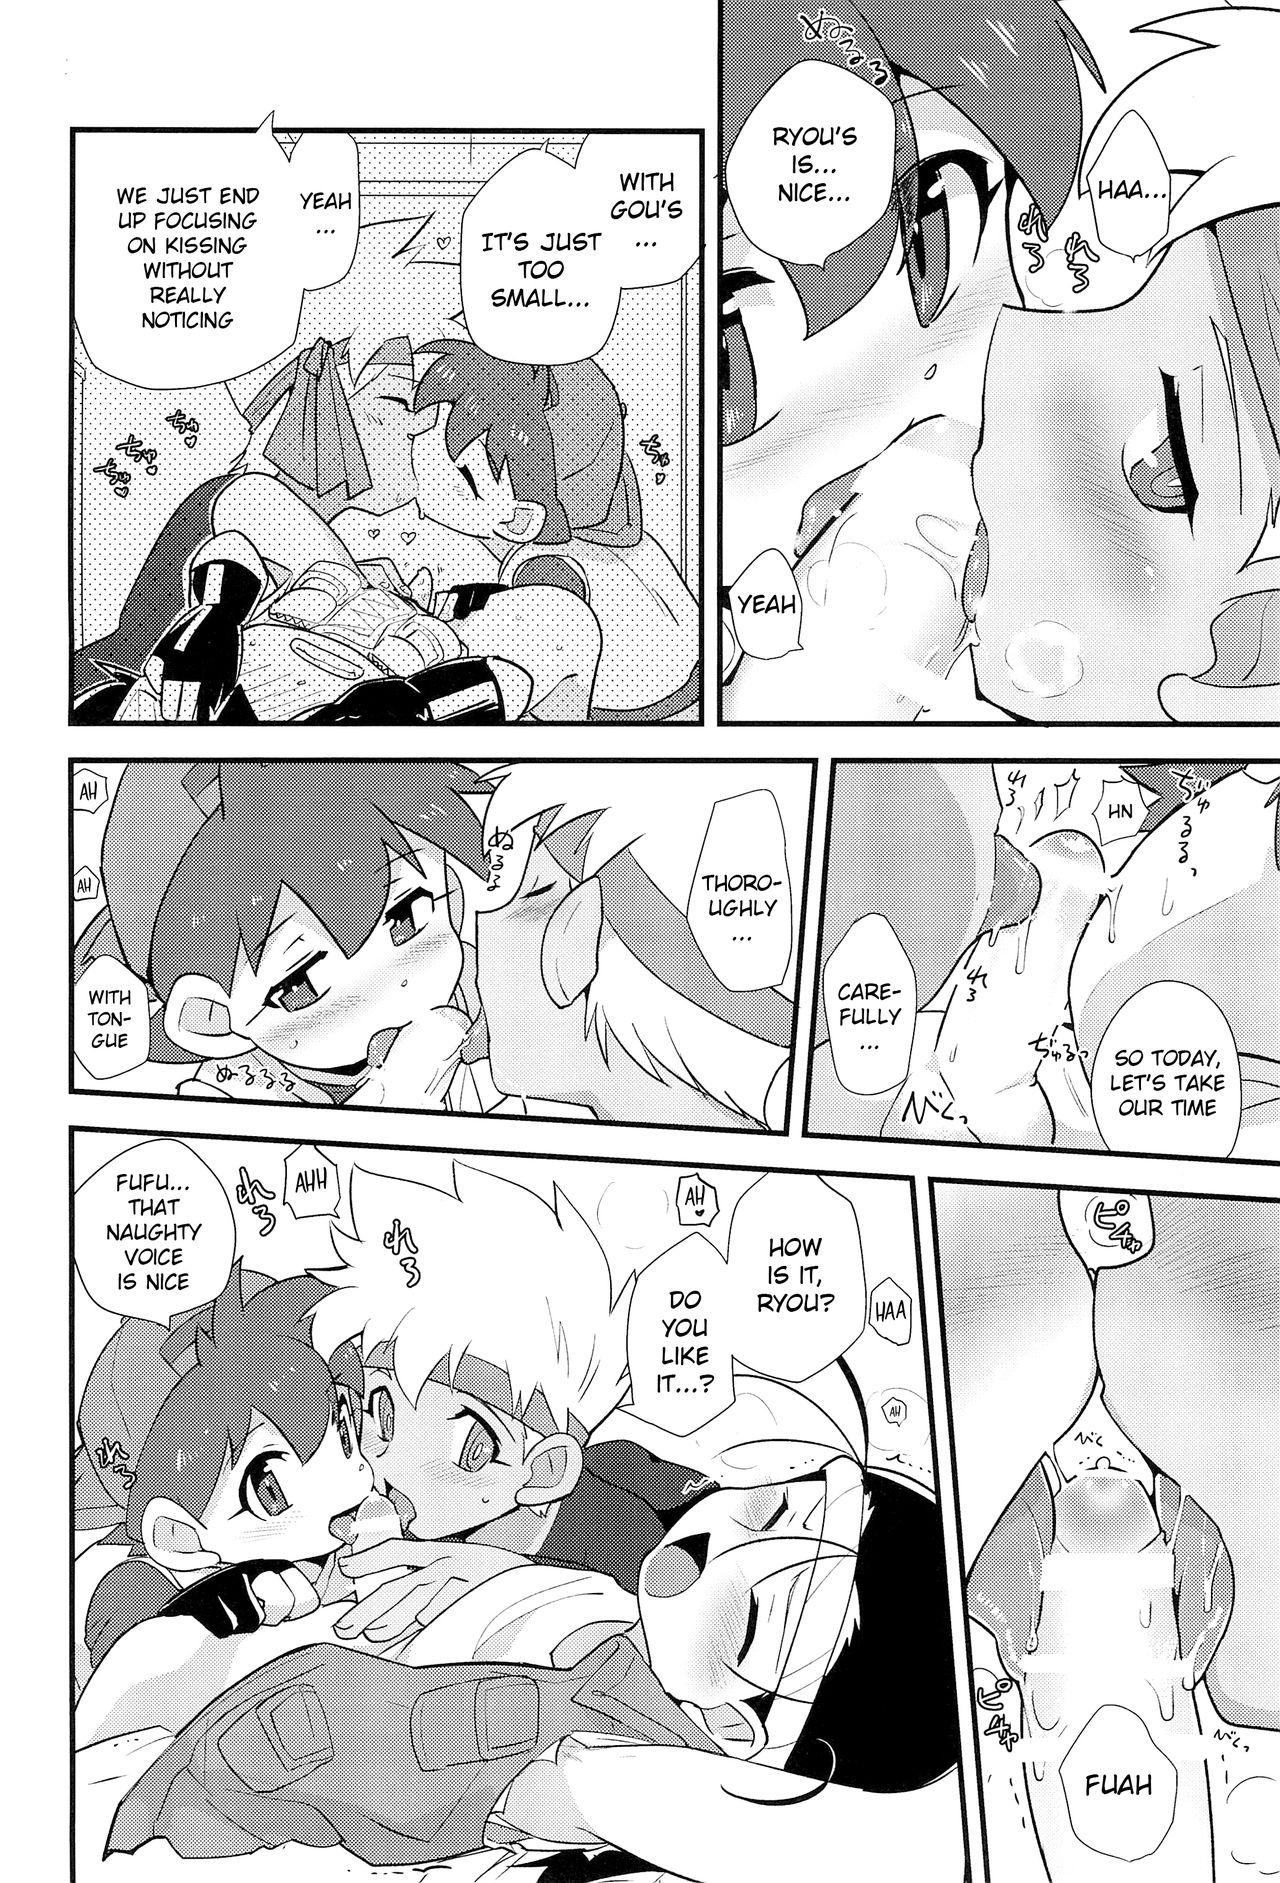 Lesbians Try Shichau? | Wanna Try It? - Bakusou kyoudai lets and go Swallowing - Page 7